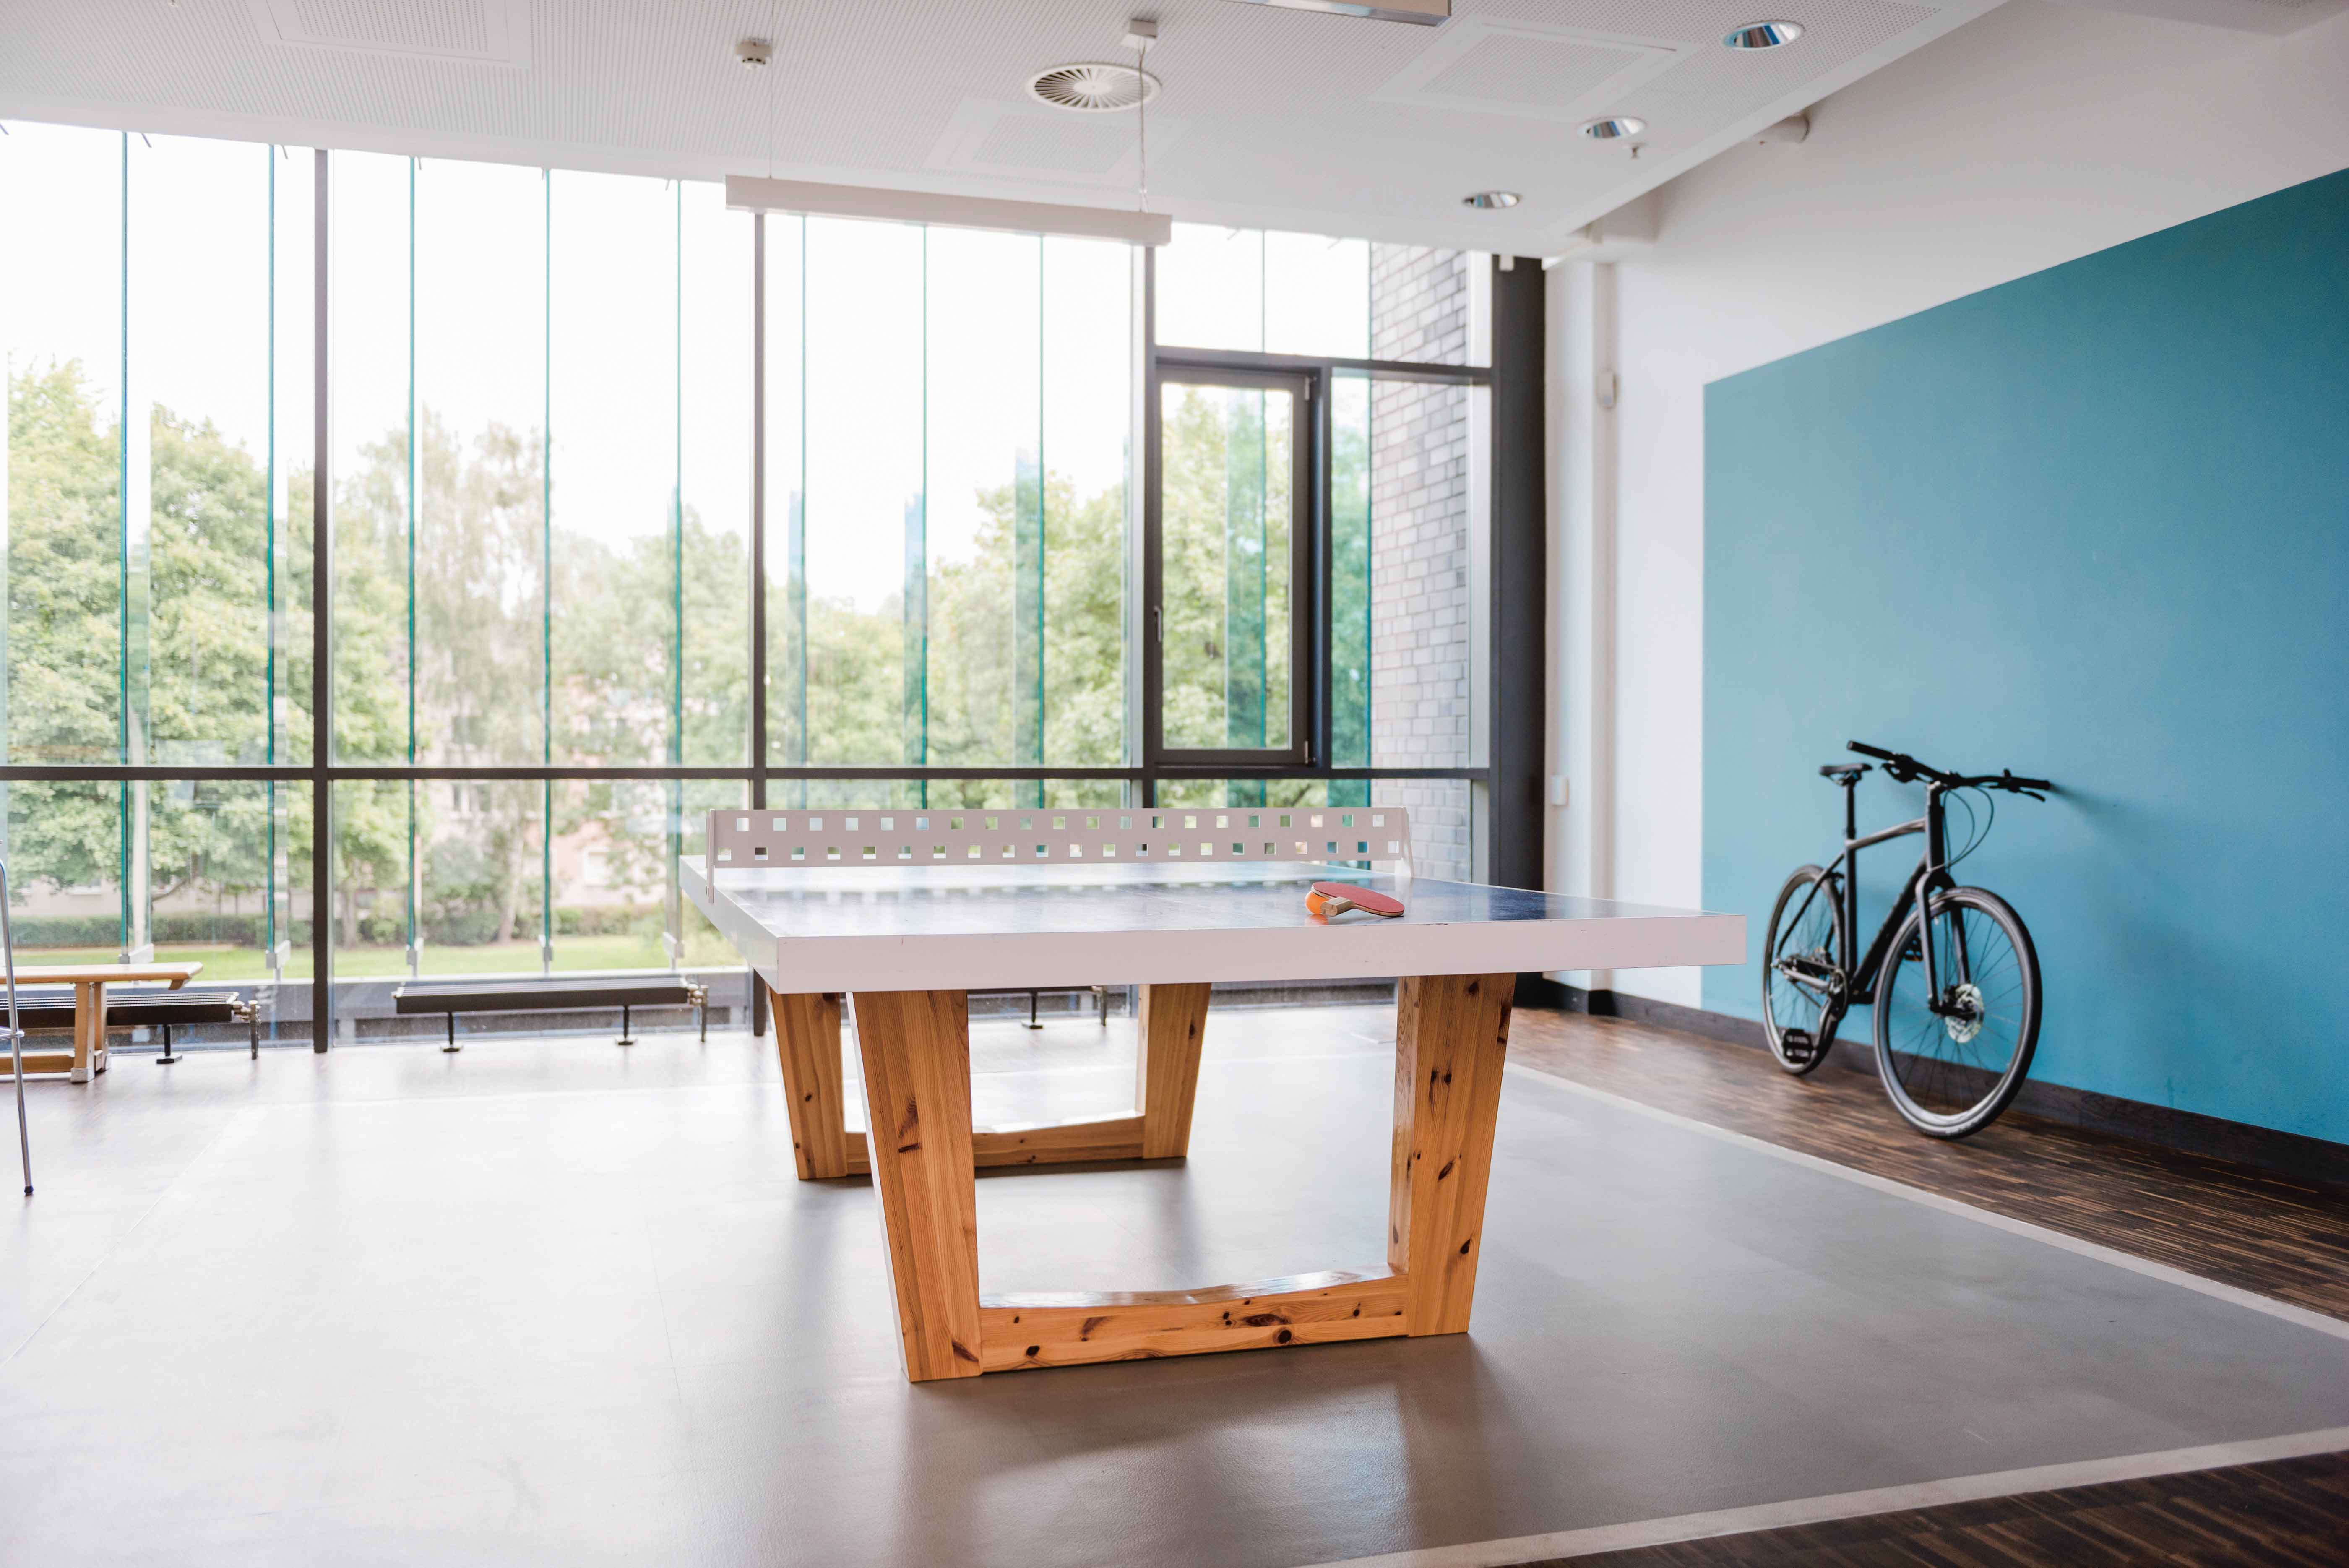 Table tennis ping pong table and bicycle in front of picture window in office recreation space